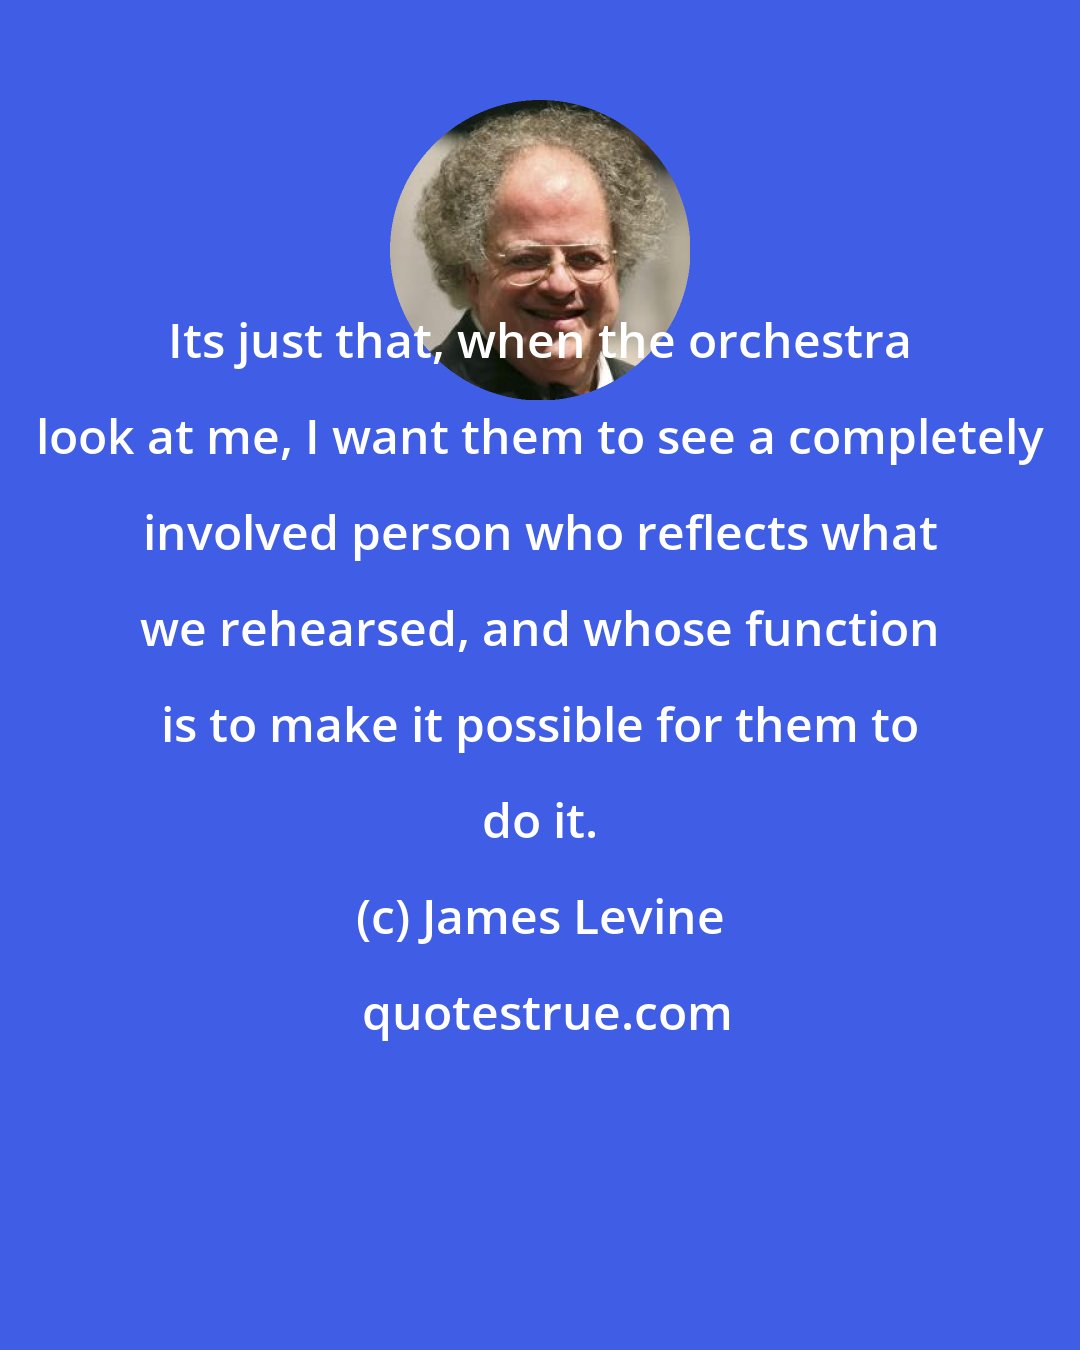 James Levine: Its just that, when the orchestra look at me, I want them to see a completely involved person who reflects what we rehearsed, and whose function is to make it possible for them to do it.